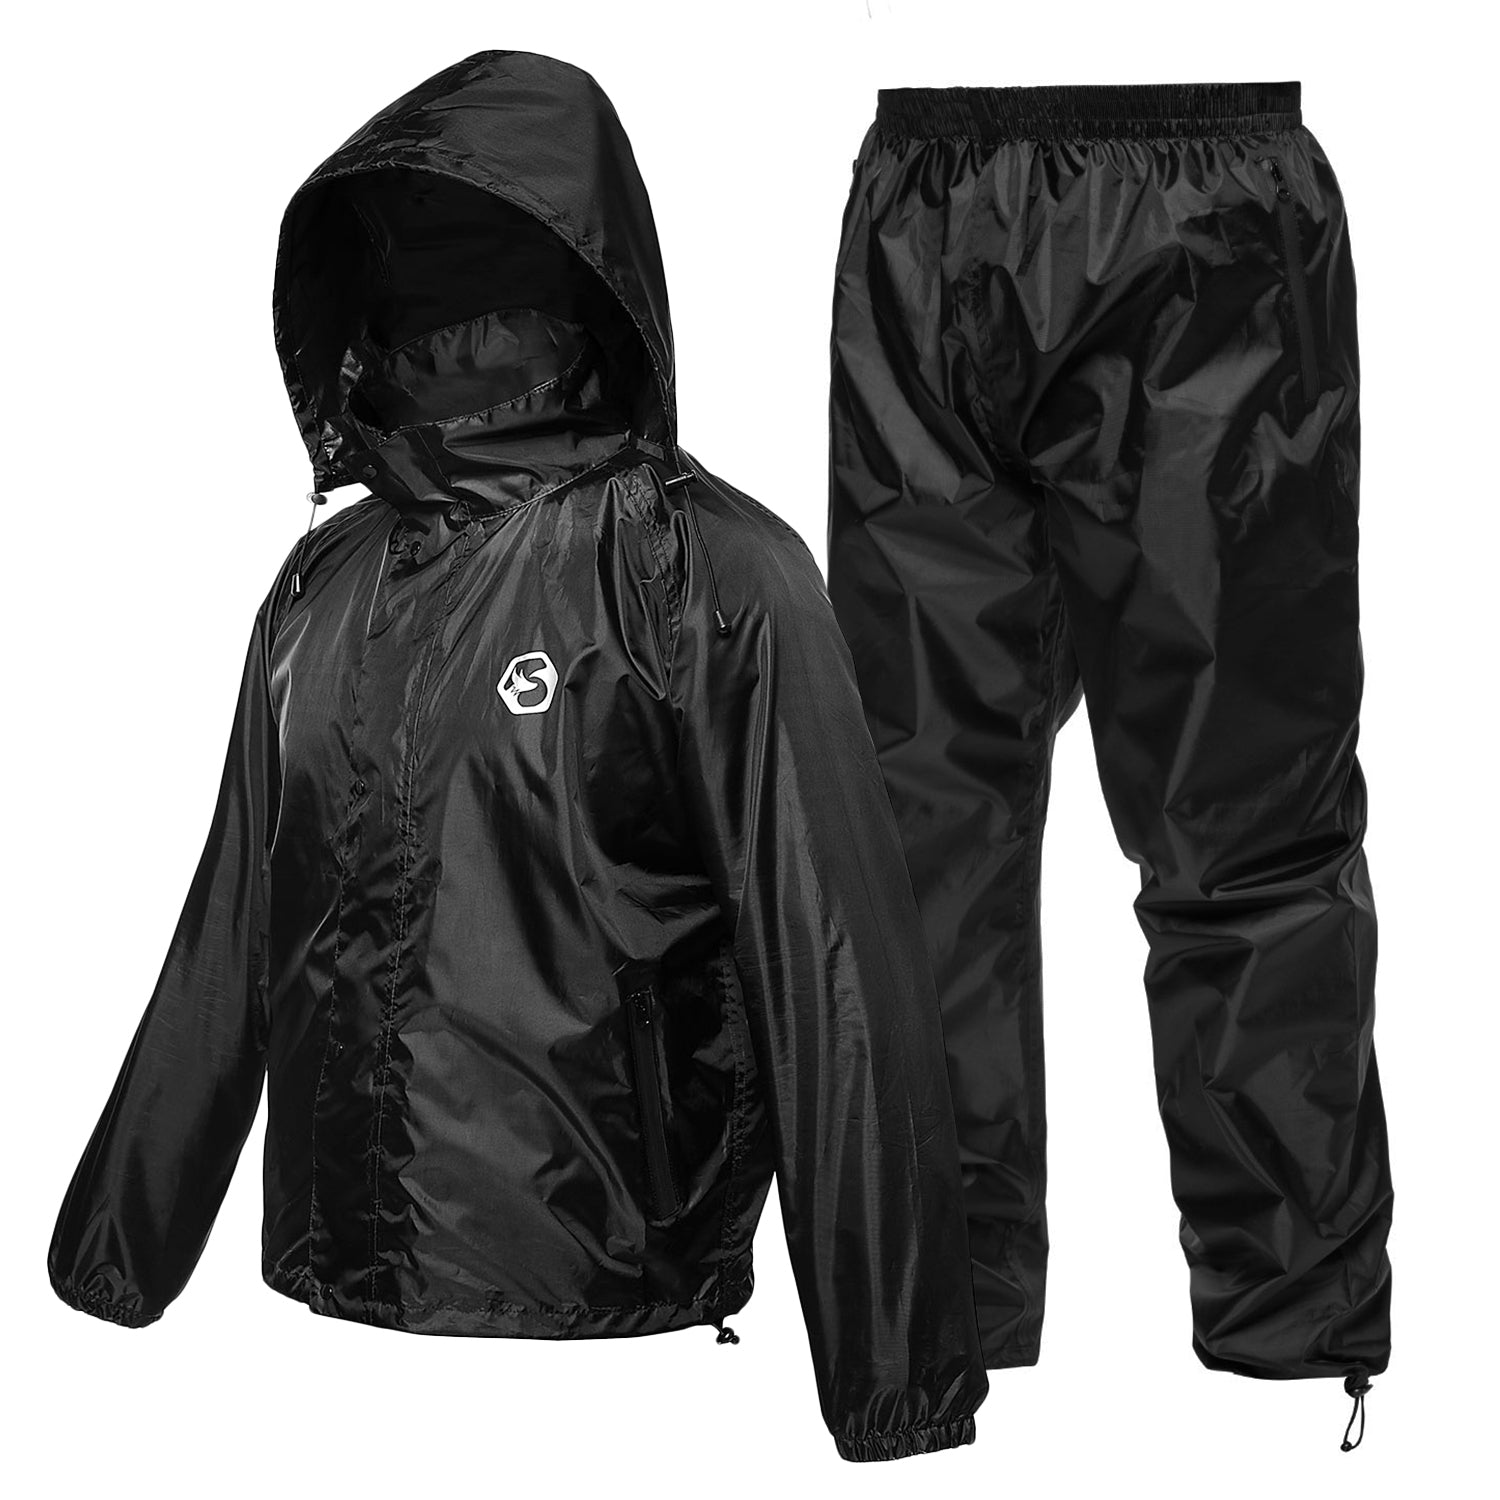 Buy AIM WATERPROOF GENTS/MEN SOLID RAINCOAT WITH PANT COOL STYLISH 1012  (XXL, Black) at Amazon.in